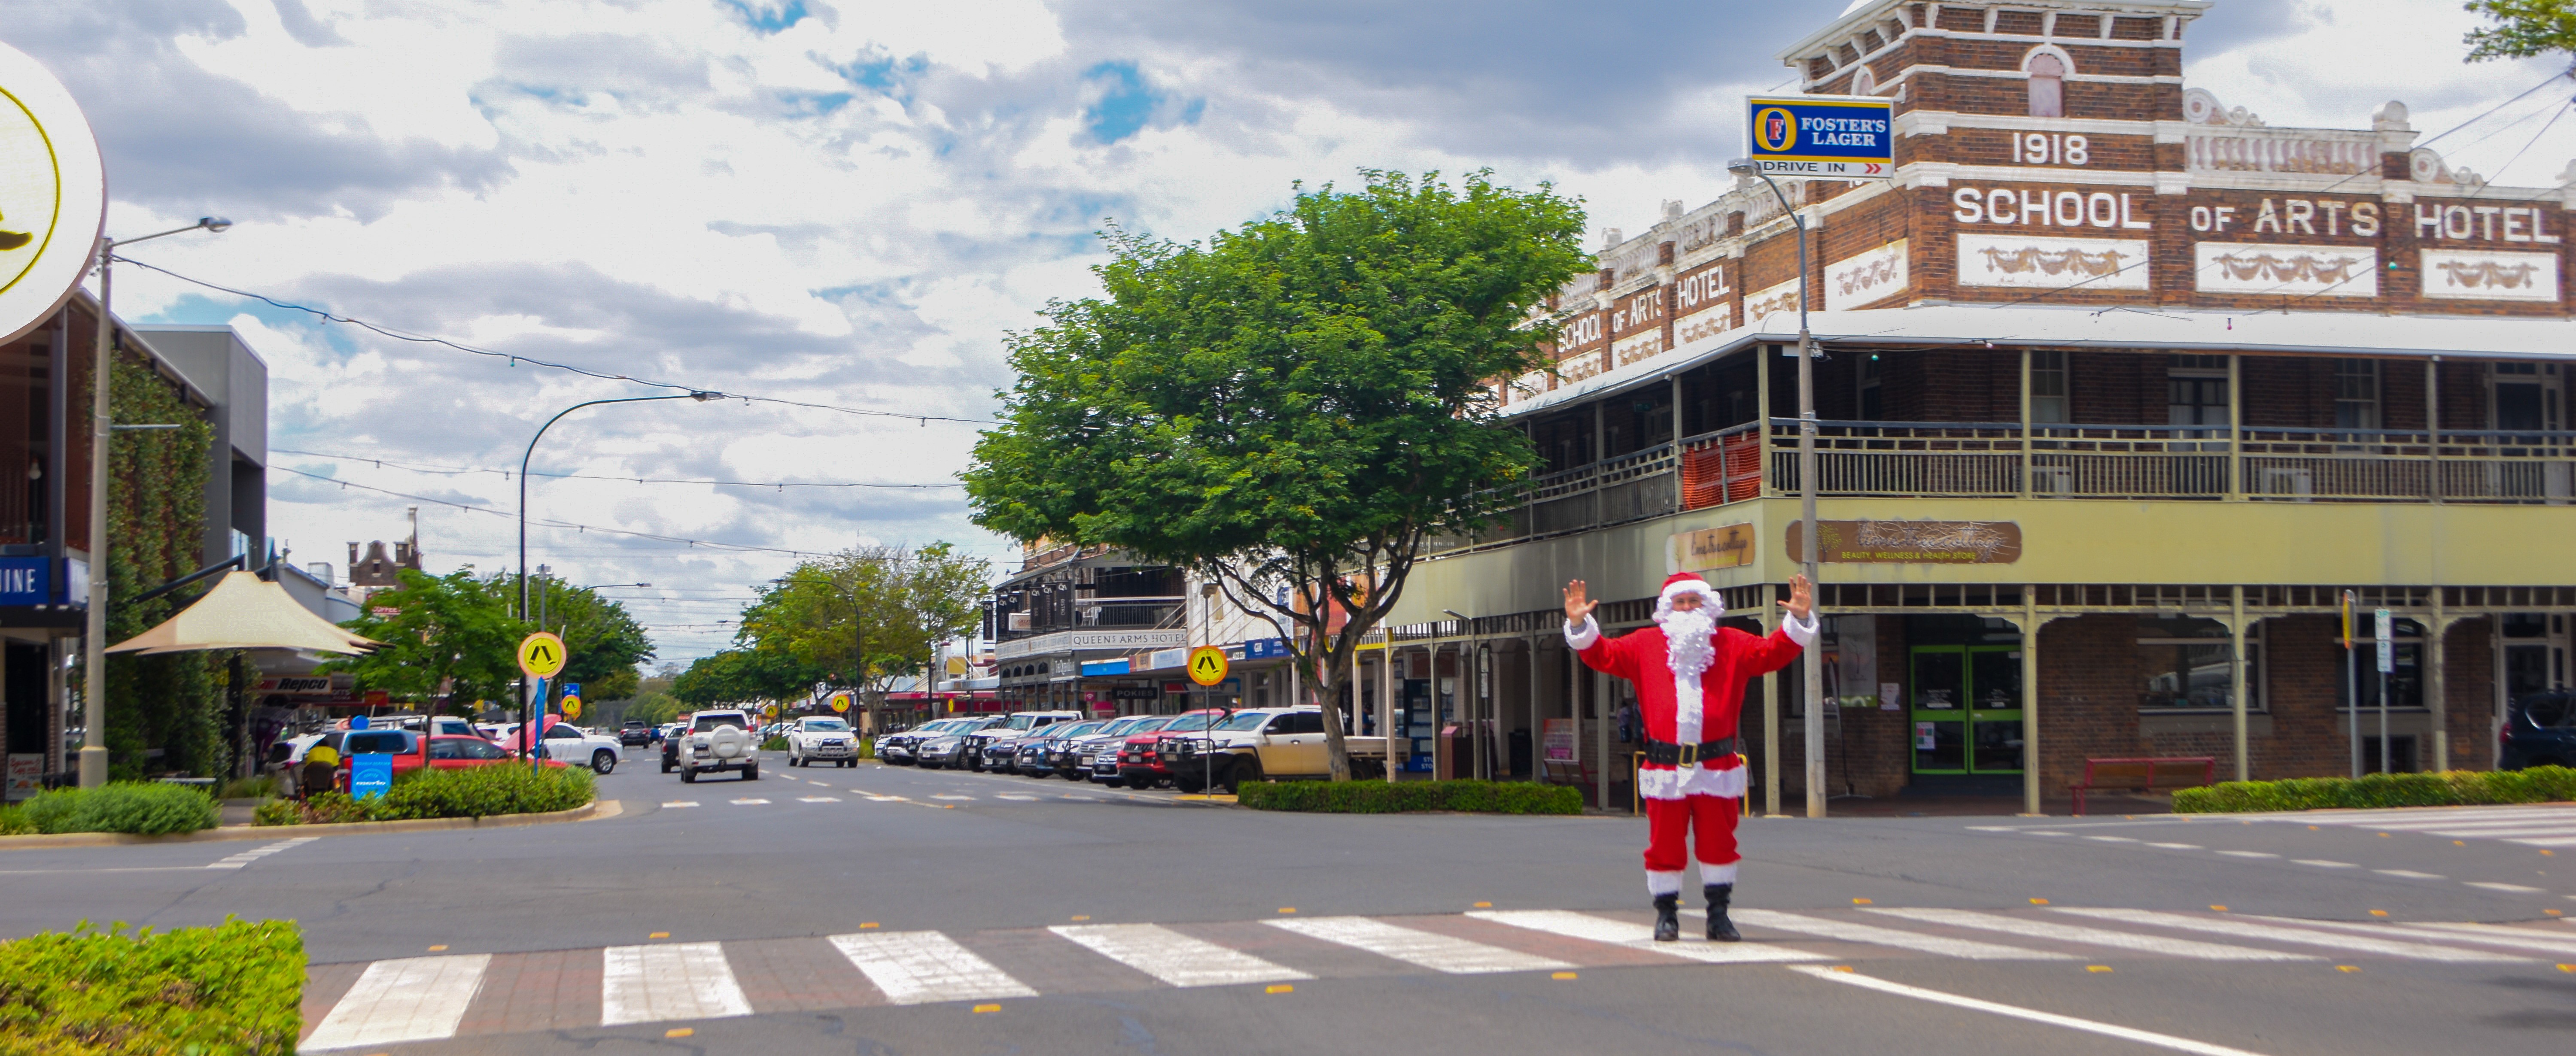 Santa is excited to welcome you to the maranoa christmas street party 4